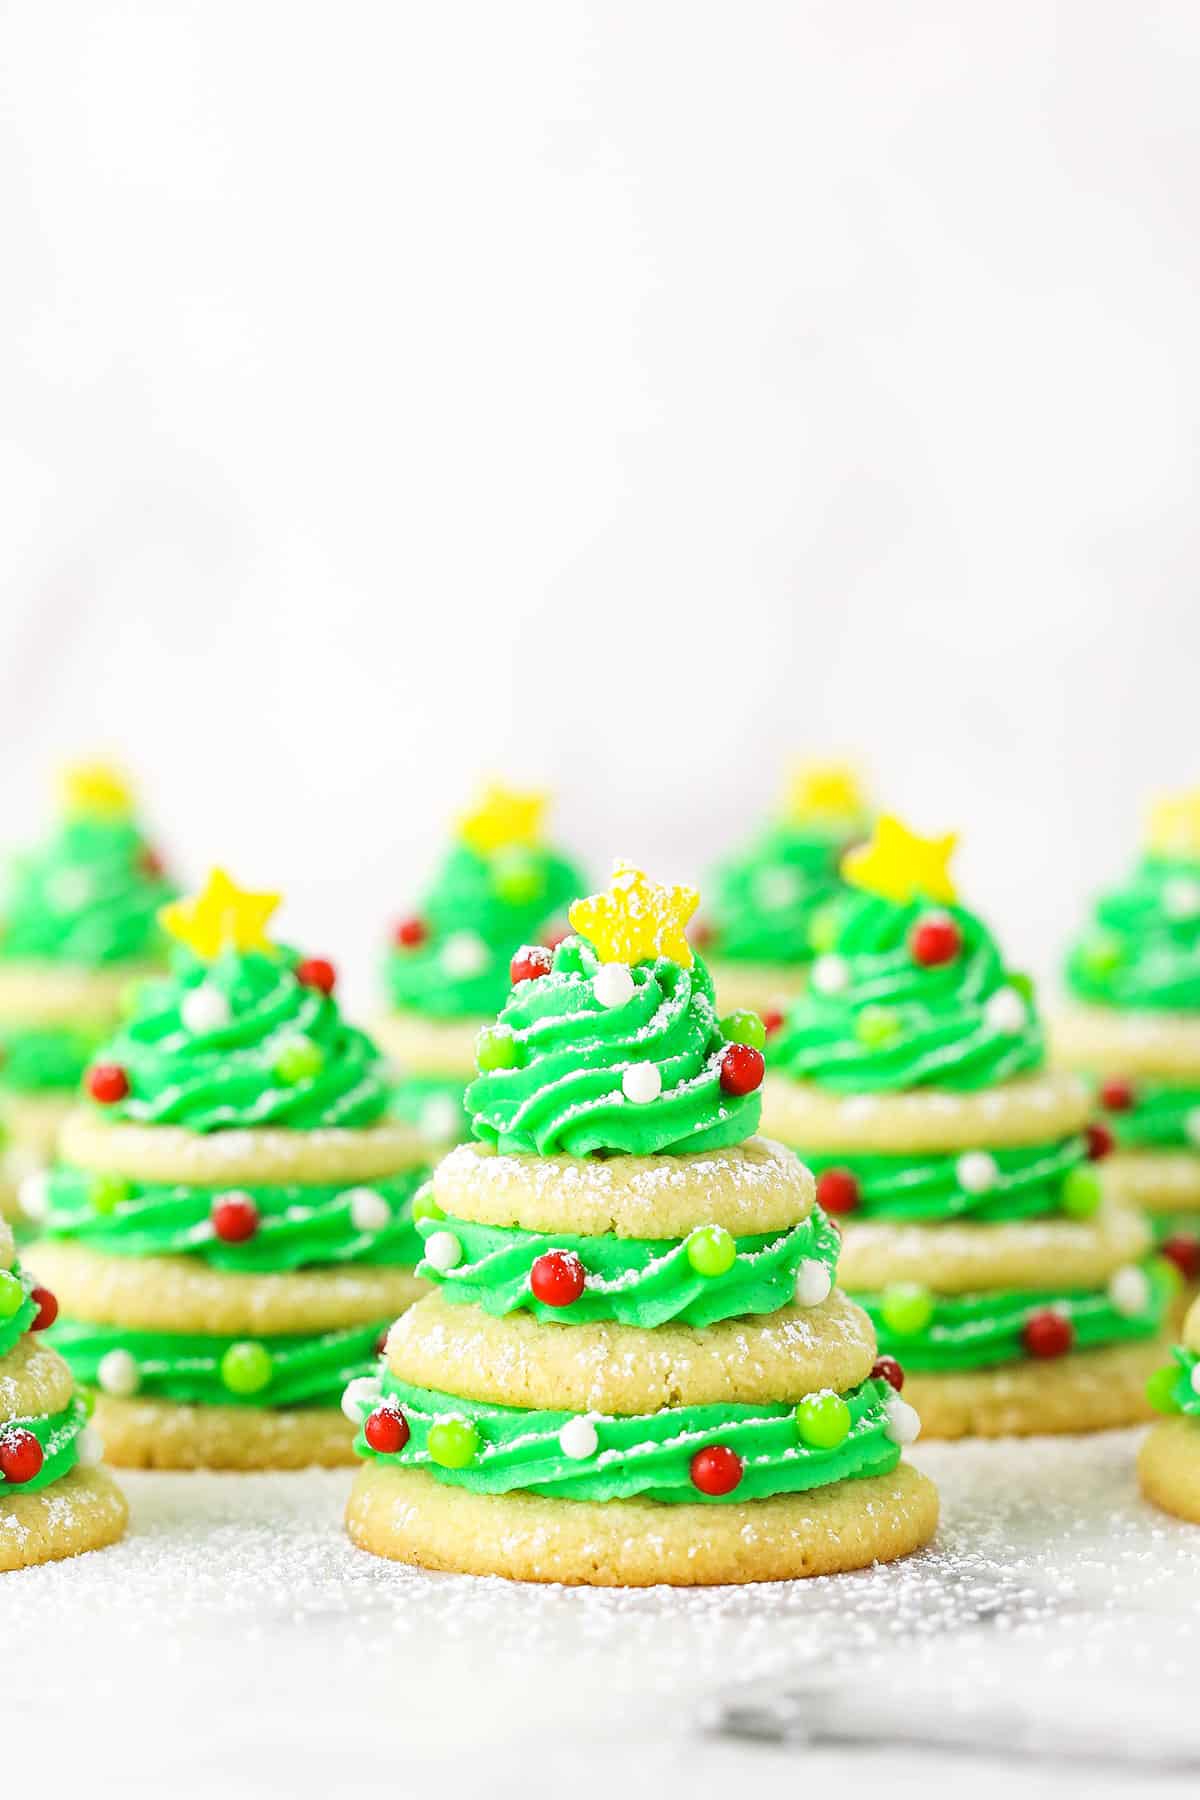 The Ultimate Christmas Cookie Storage container - Sweet Stackers